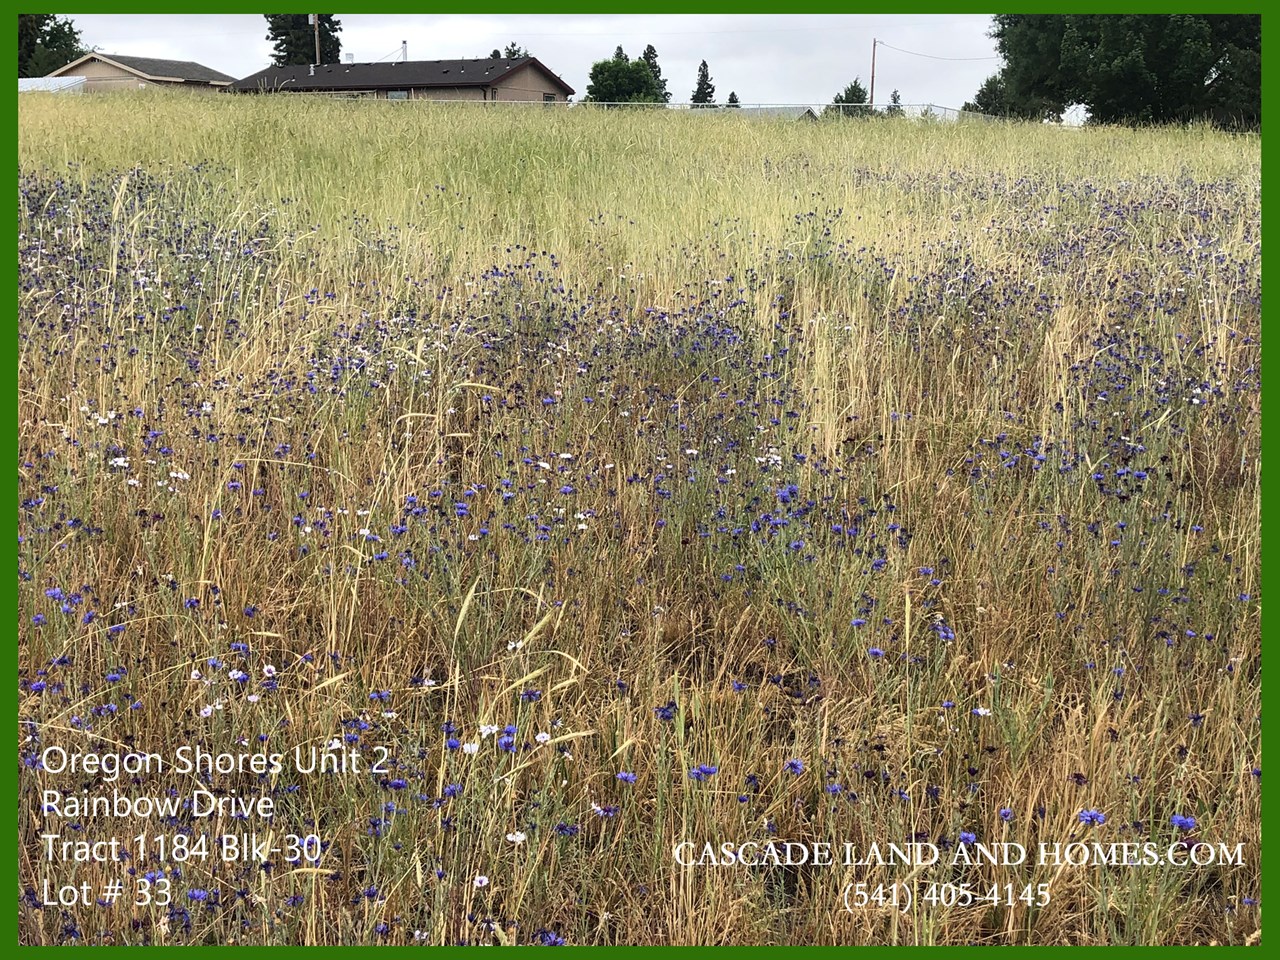 bring your house plans! this parcel has a lot of potential, and look at those gorgeous flowers!